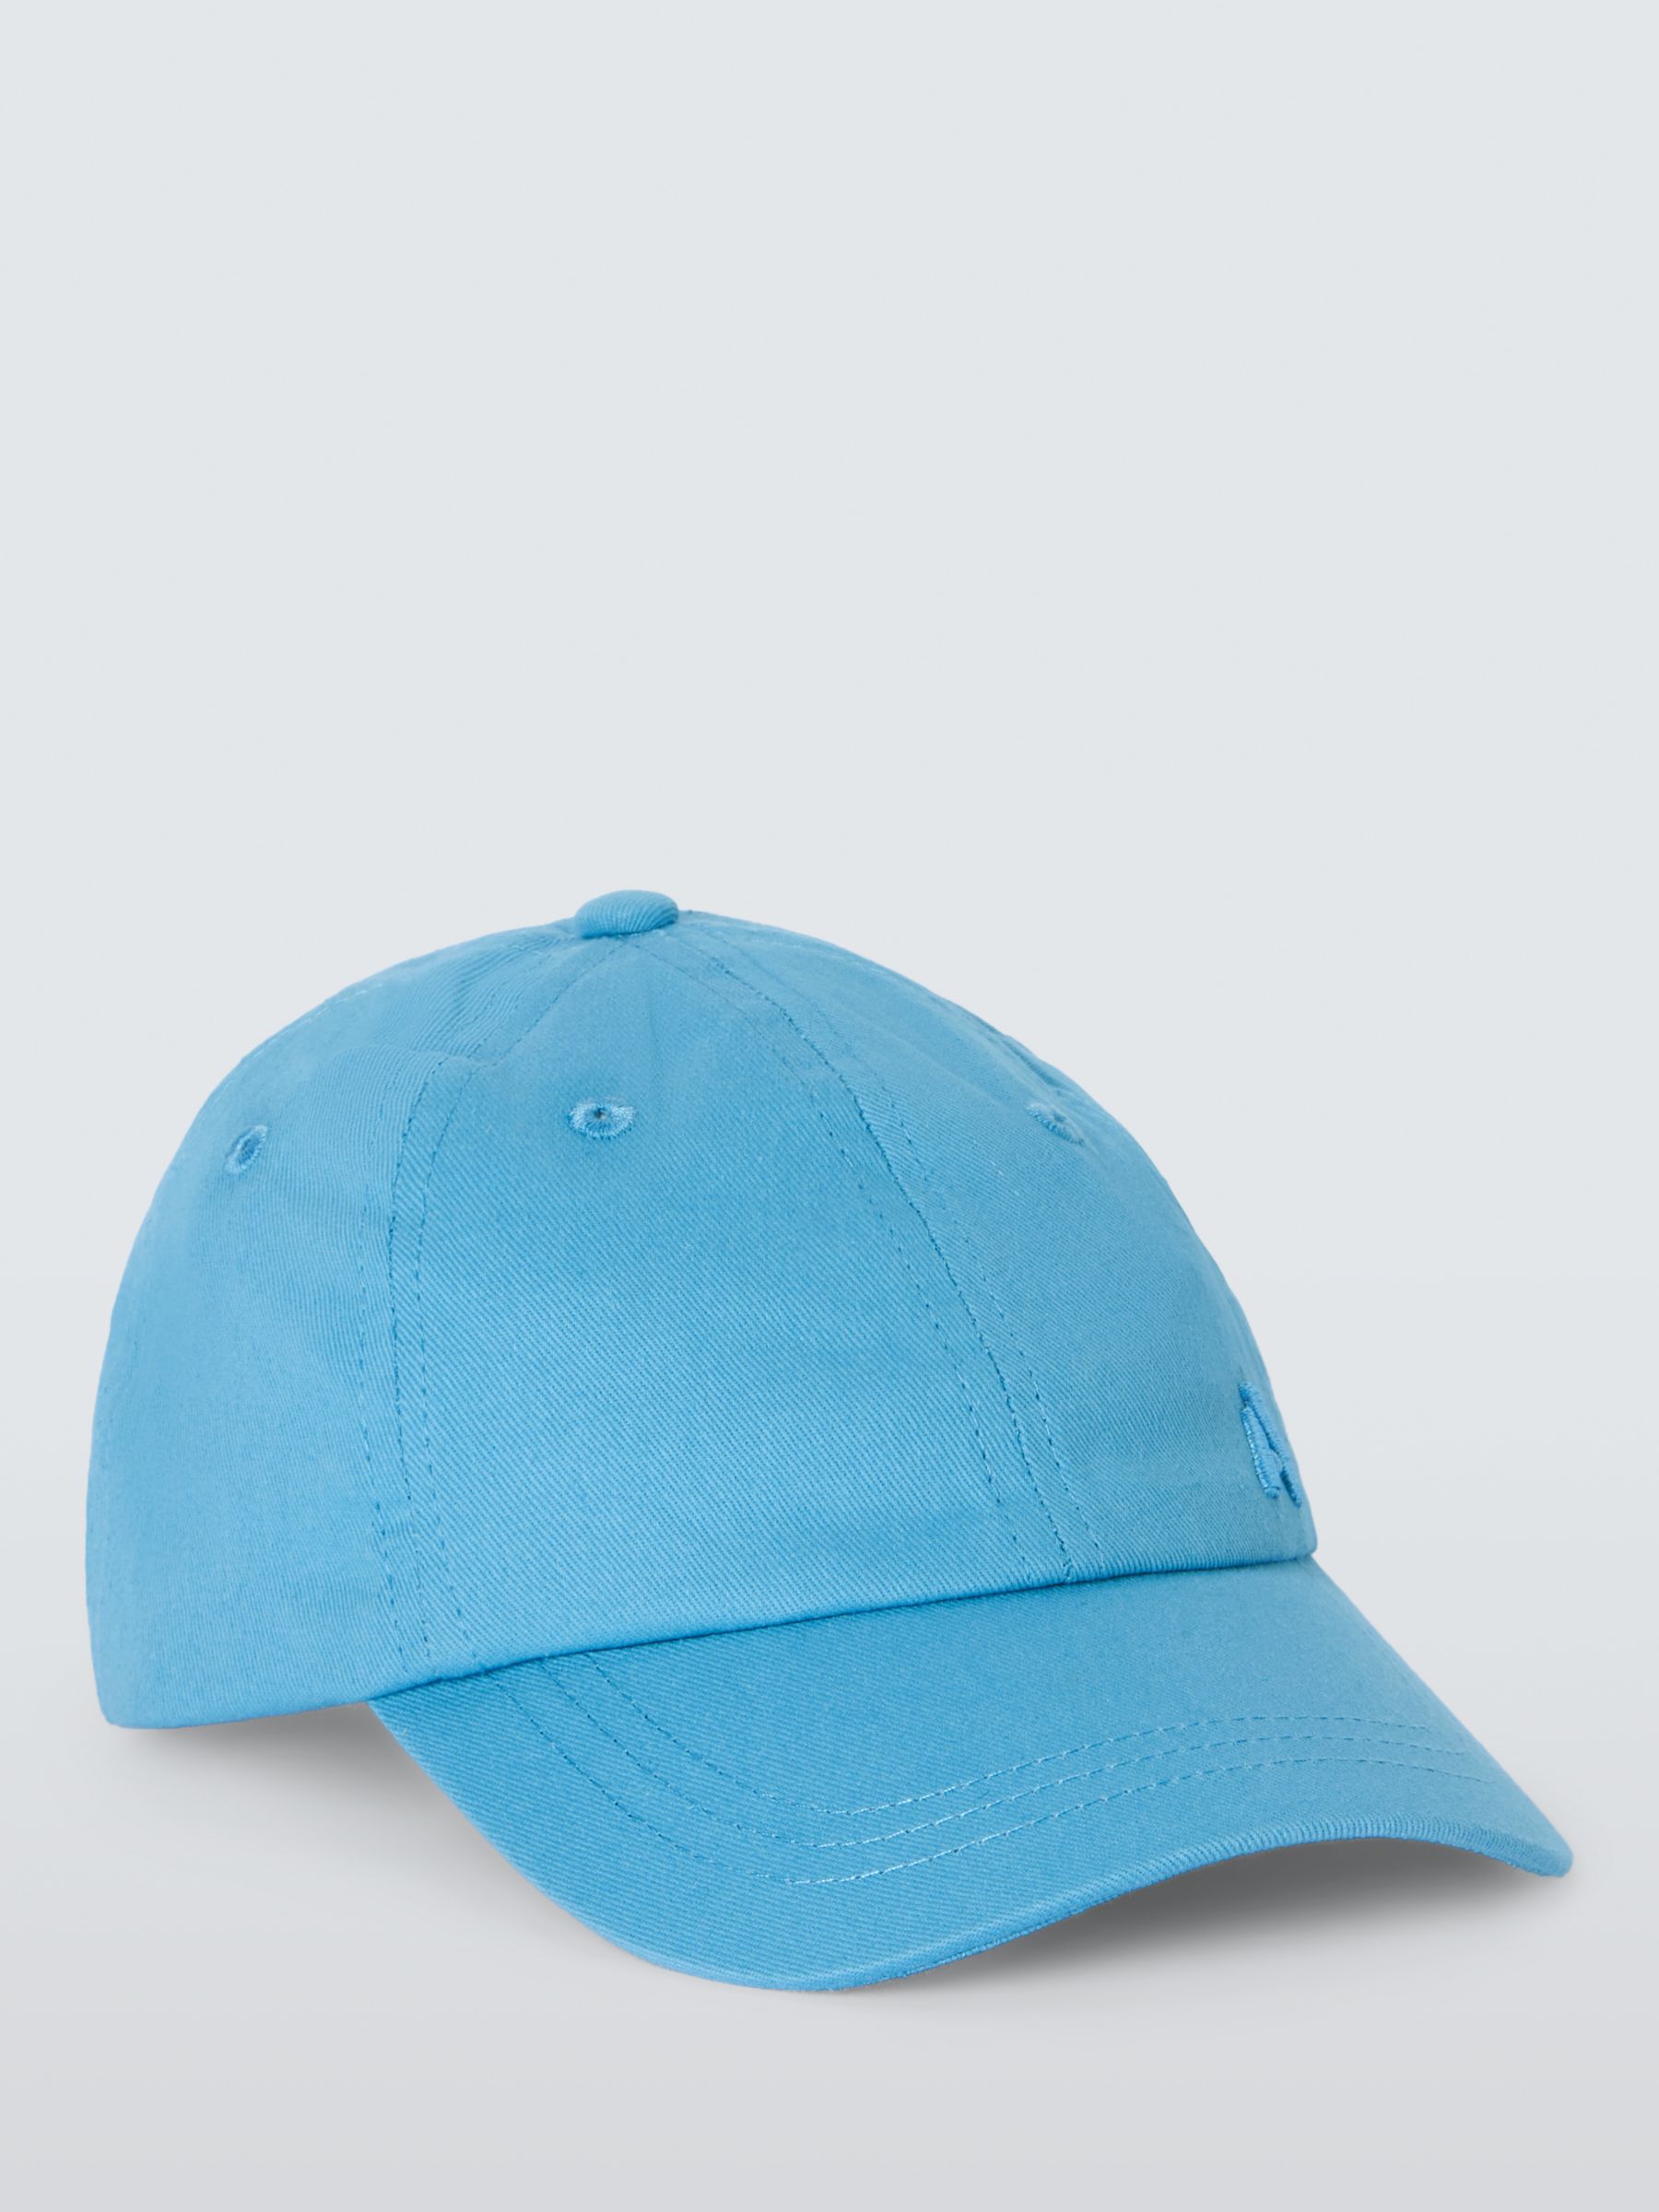 John Lewis ANYDAY Kids' Embroidered Baseball Cap, Blue, 6-8 years